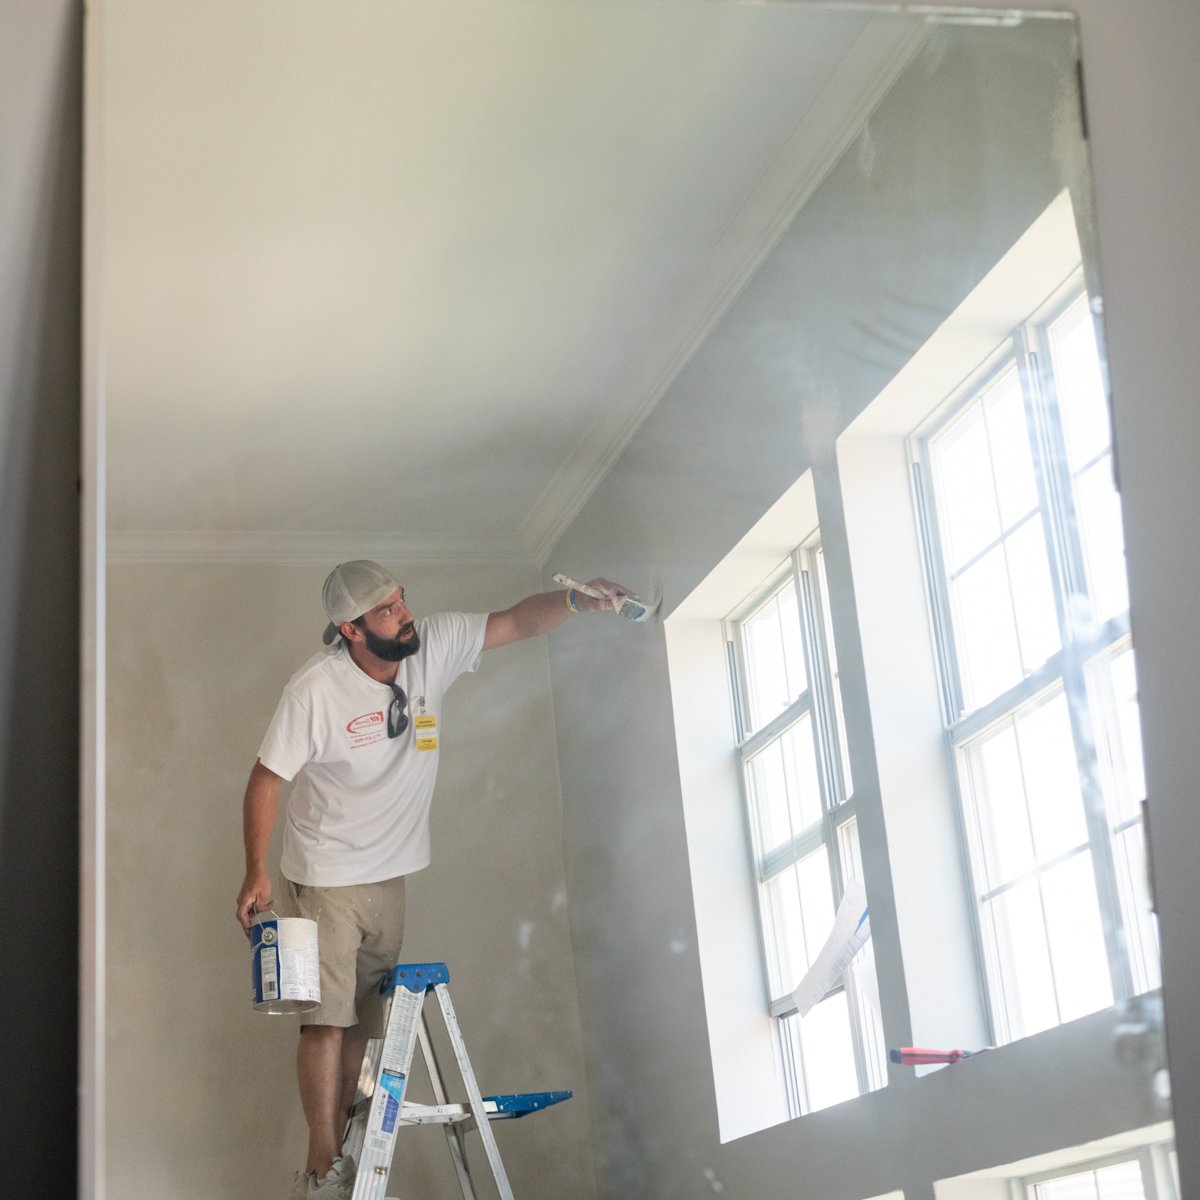 Even though you might not always see a lot of the work we do behind the scenes to make sure everything is perfect, we never cut corners. When it comes to repainting your home, trust is key, and we're here to earn yours. #VIPServices #HomeImprovements